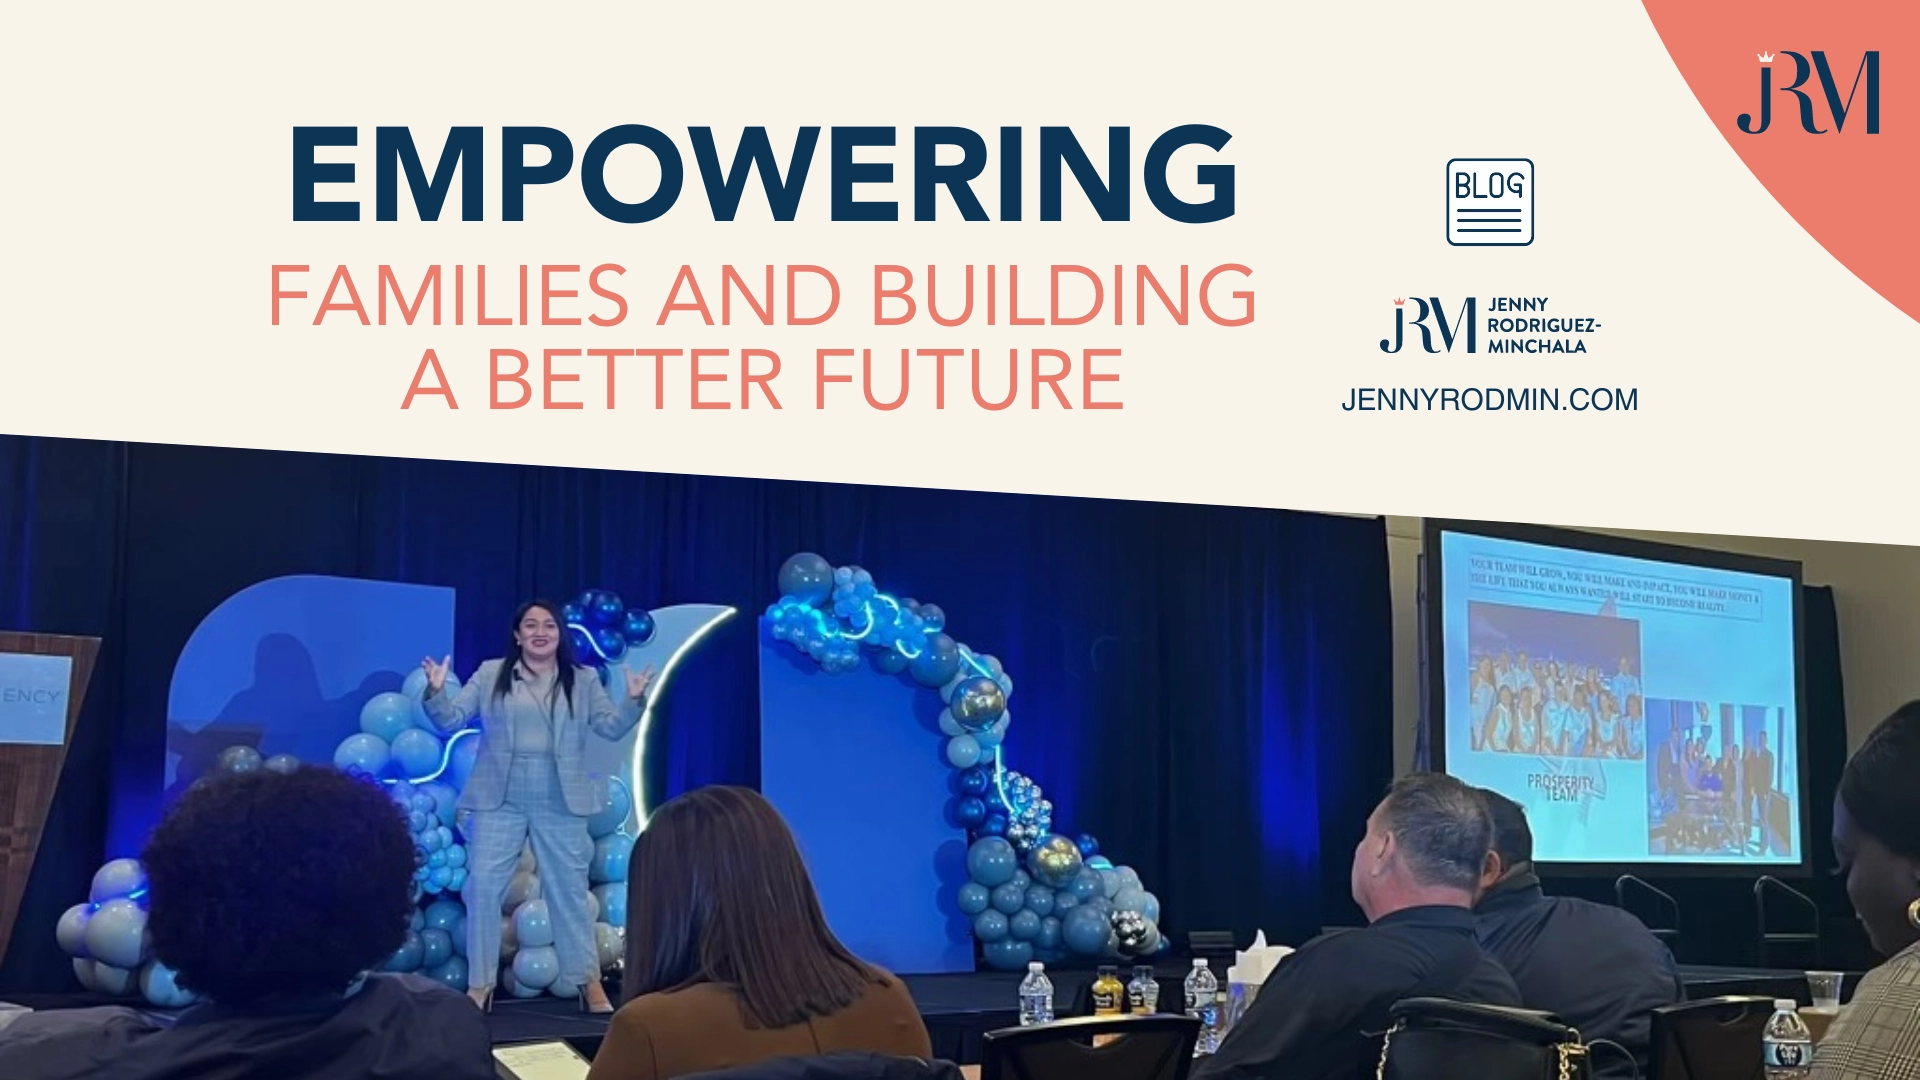 My Journey to Success: Empowering Families and Building a Better Future